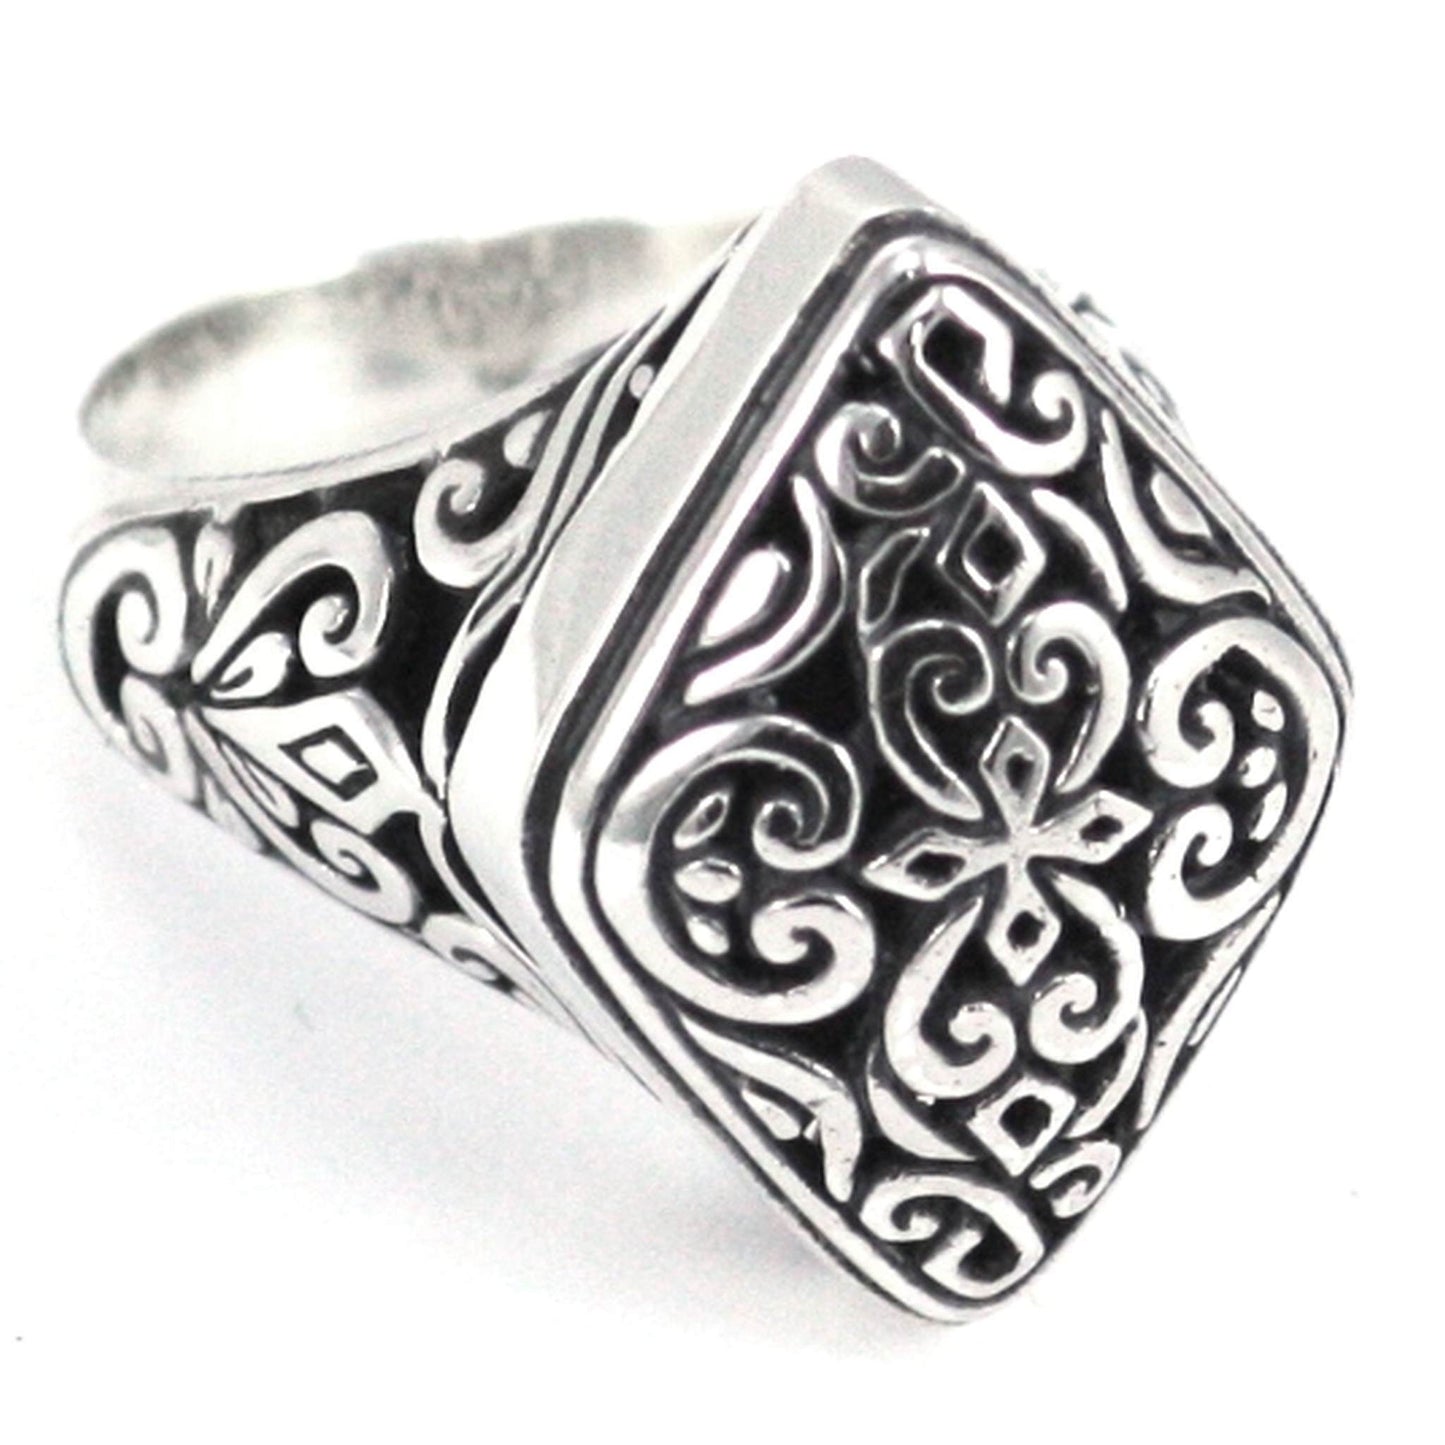 R763 size 6 LIMITED .925 Sterling Silver Ornate Filigree Ring